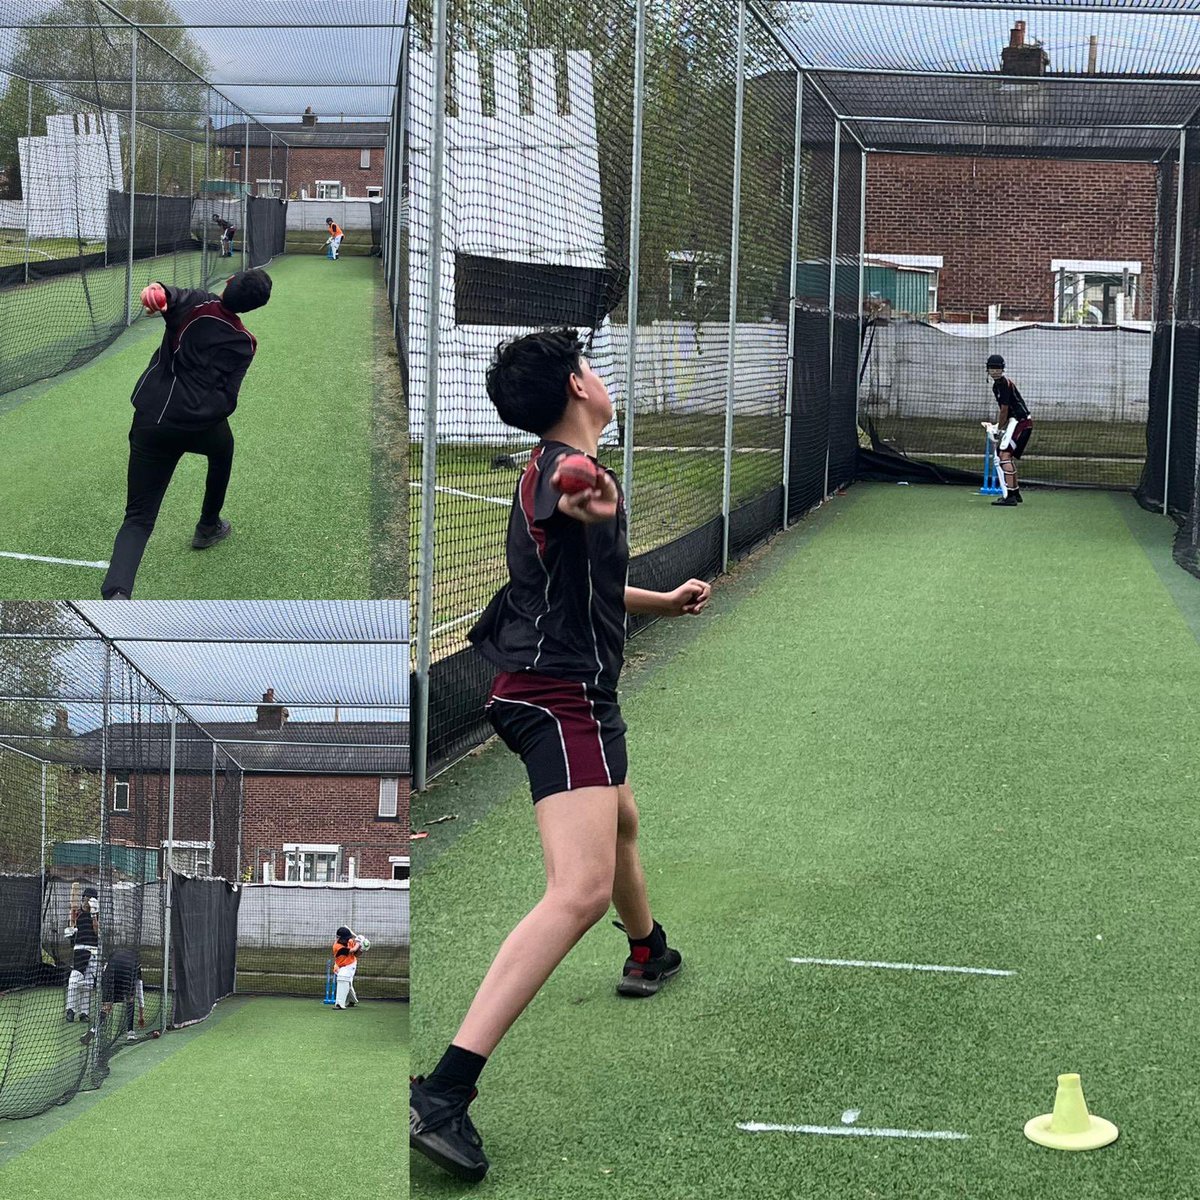 Over 30 students enjoyed the first cricket session of our extra-curricular programme @Farnworthcc this afternoon. Thank you Liam and Conor for your support. All welcome back next week and if you can’t wait, there is always club training on Friday 6pm. @HarperGreen